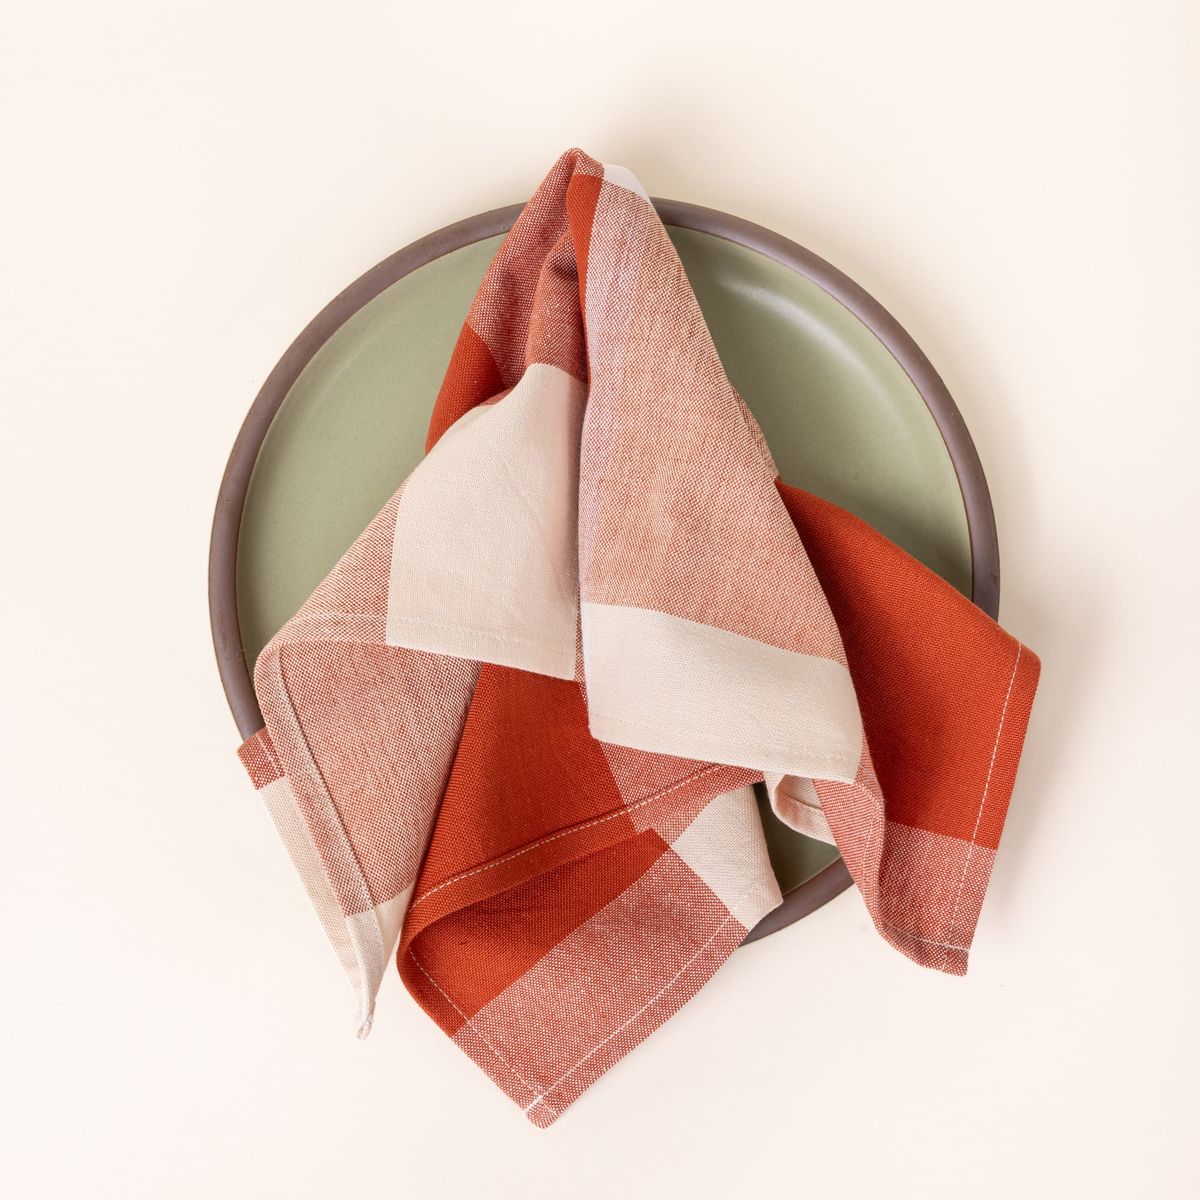 A square dinner napkin in a rust and cream gingham pattern displayed on a calming sage green ceramic dinner plate